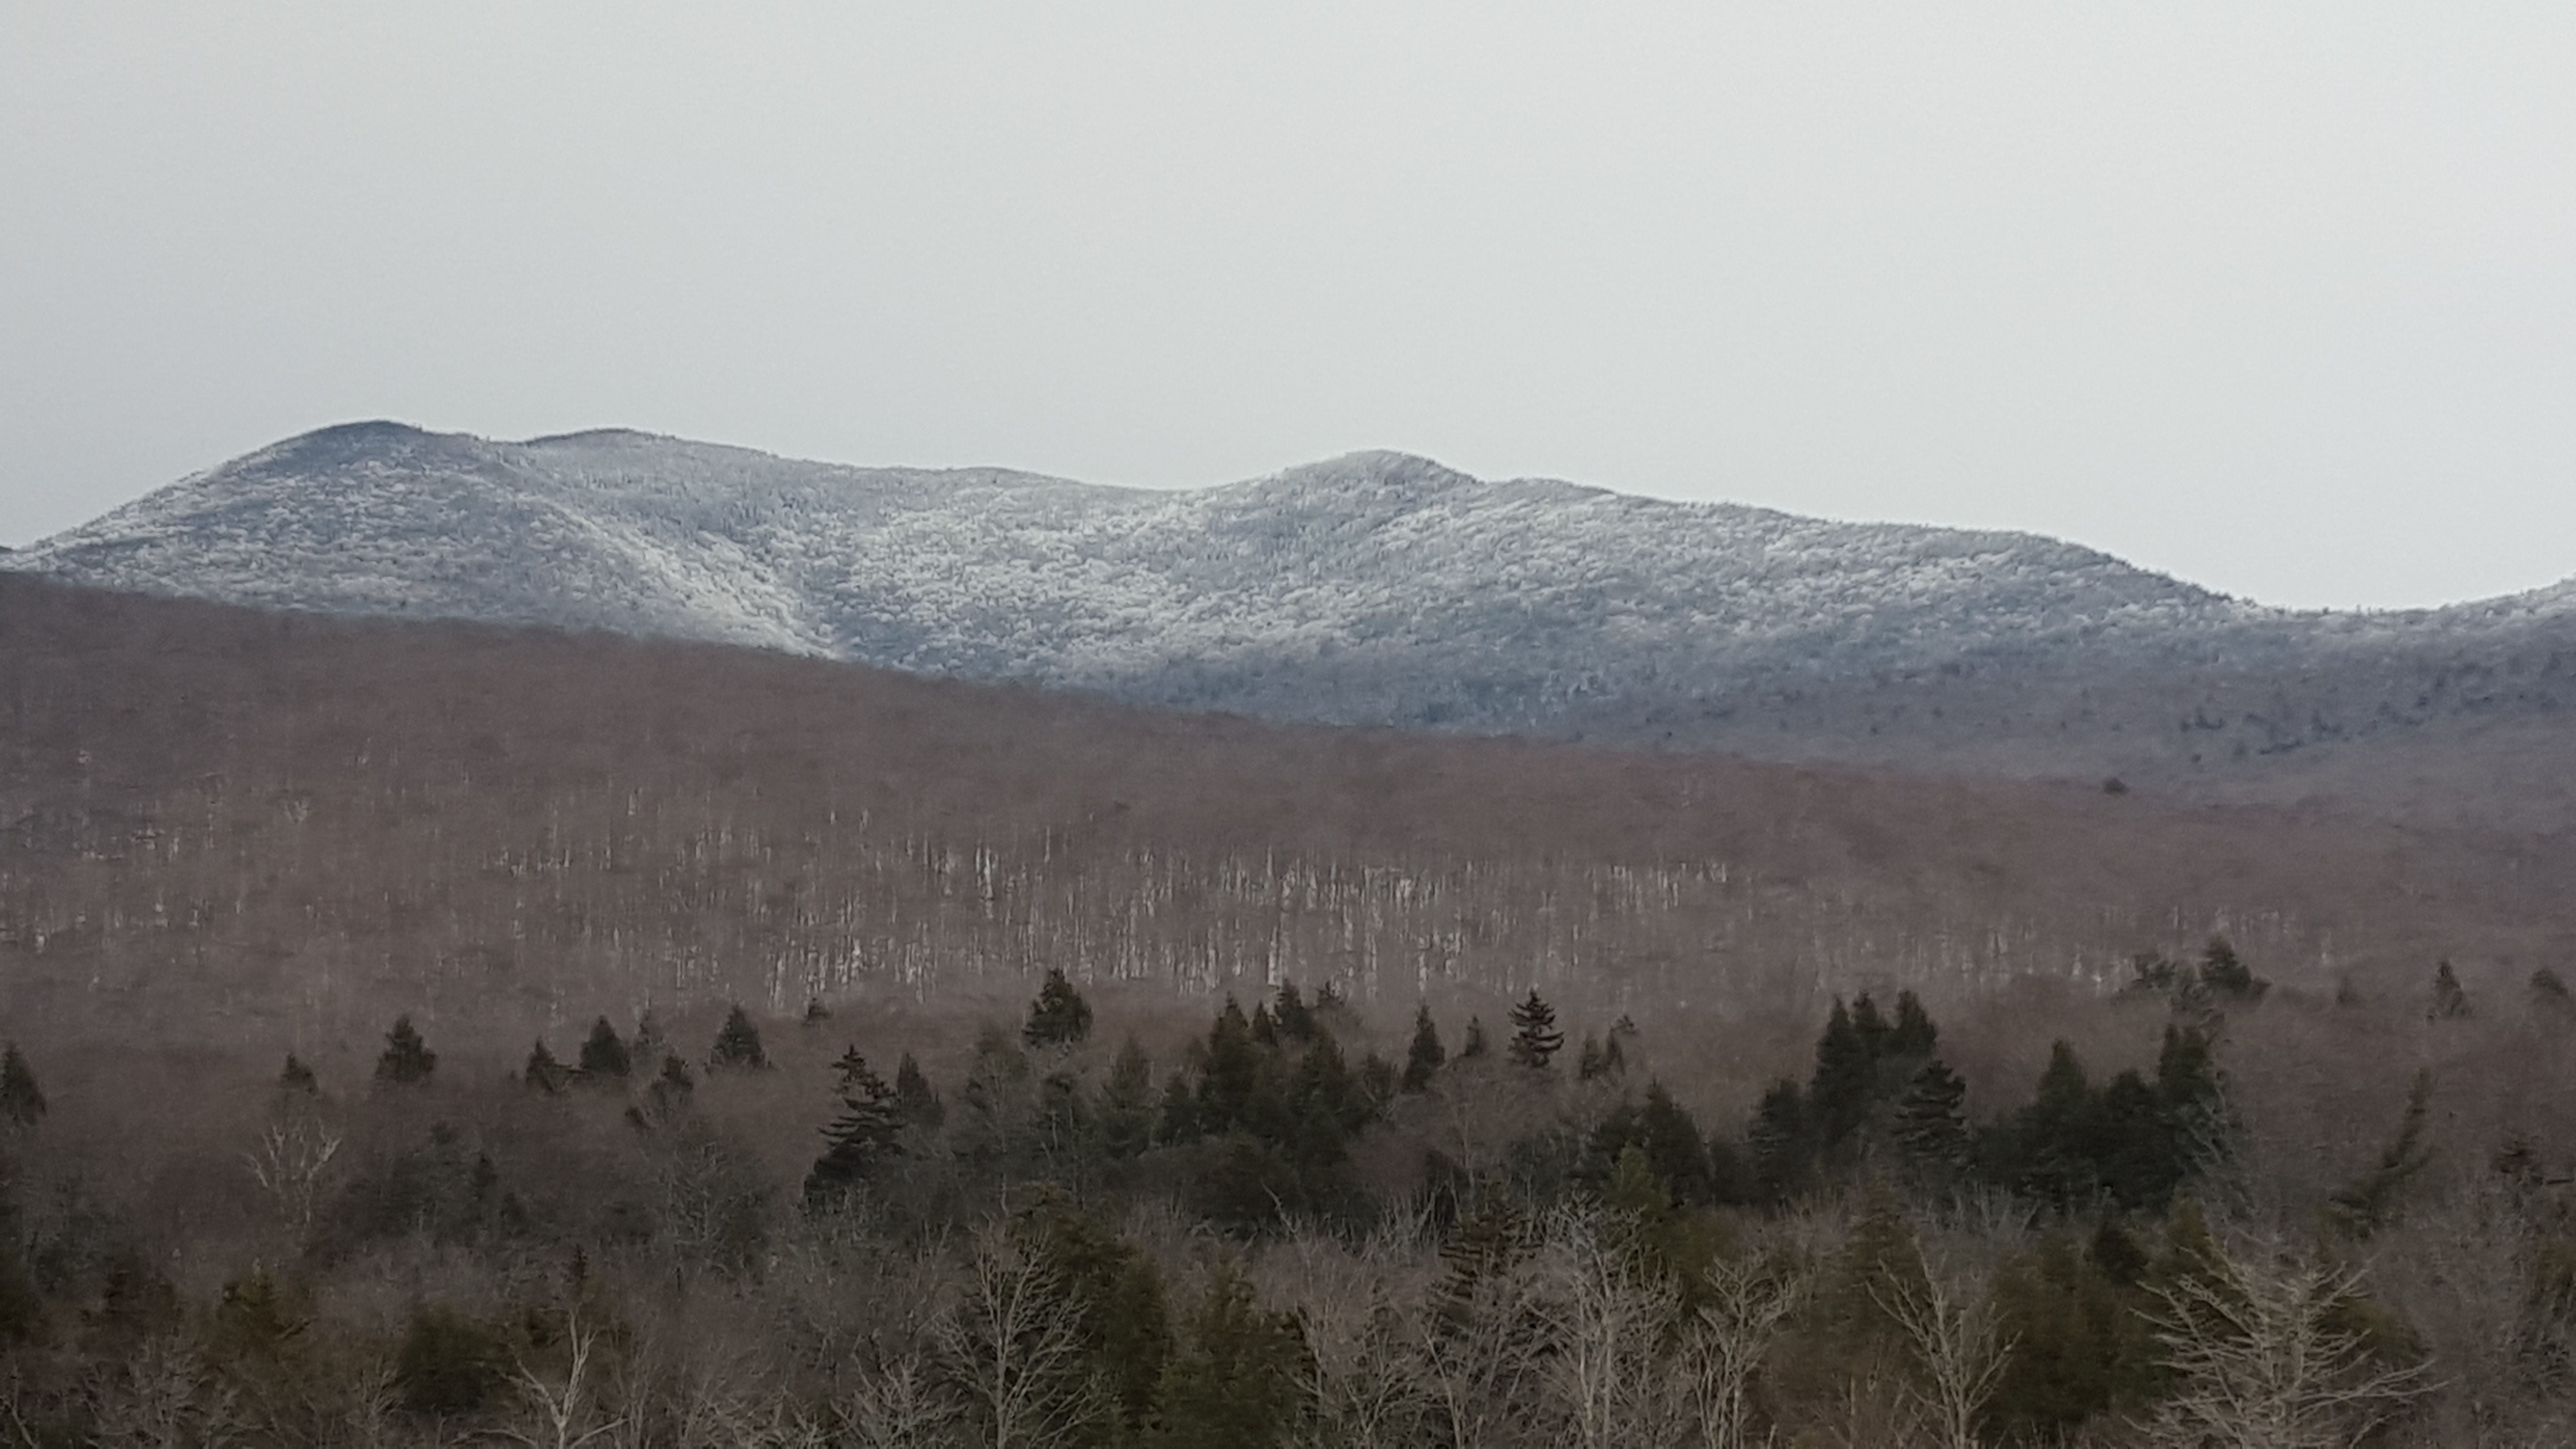 New Hampshire mountains in winter.